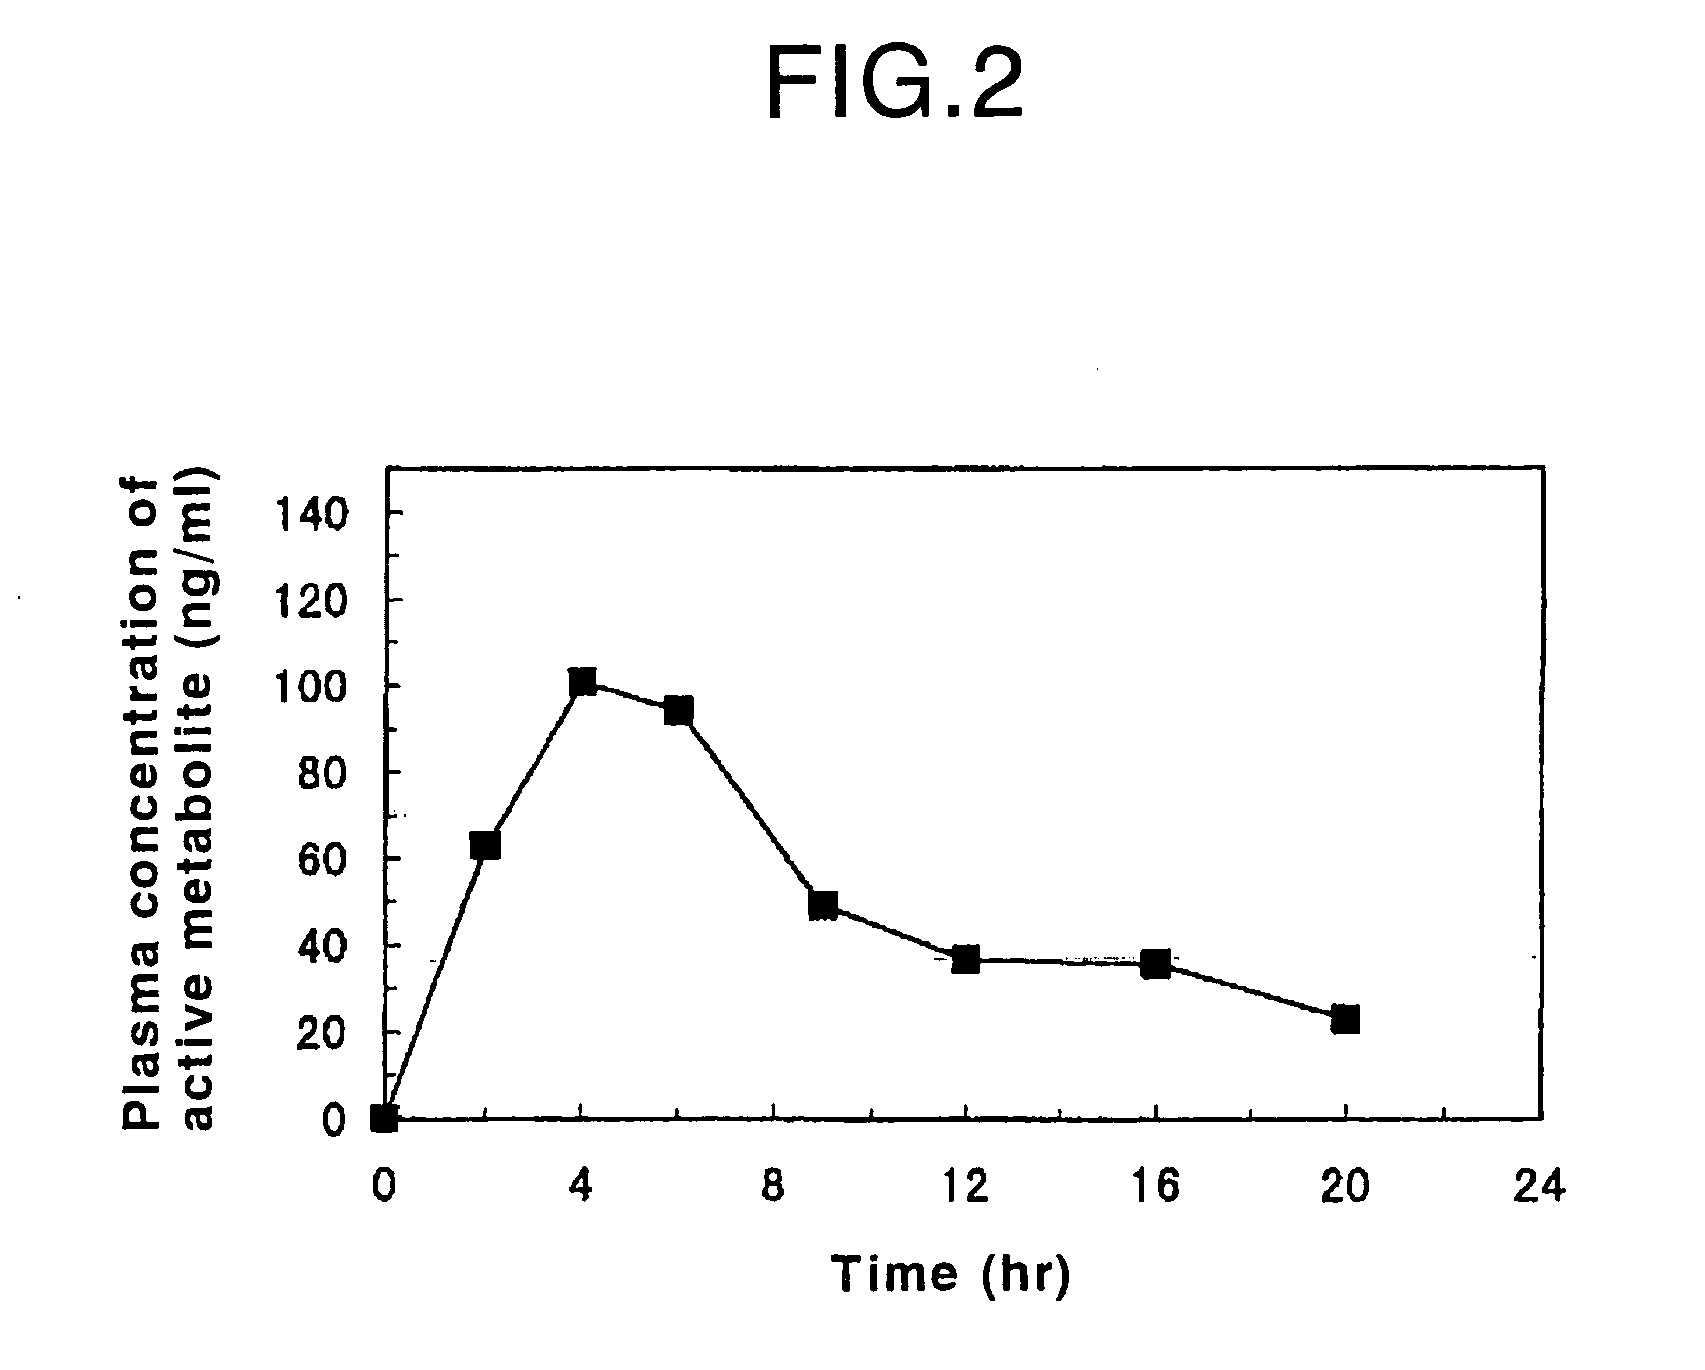 Process for producing an oral sustained-release preparation of fasudil hydrochloride